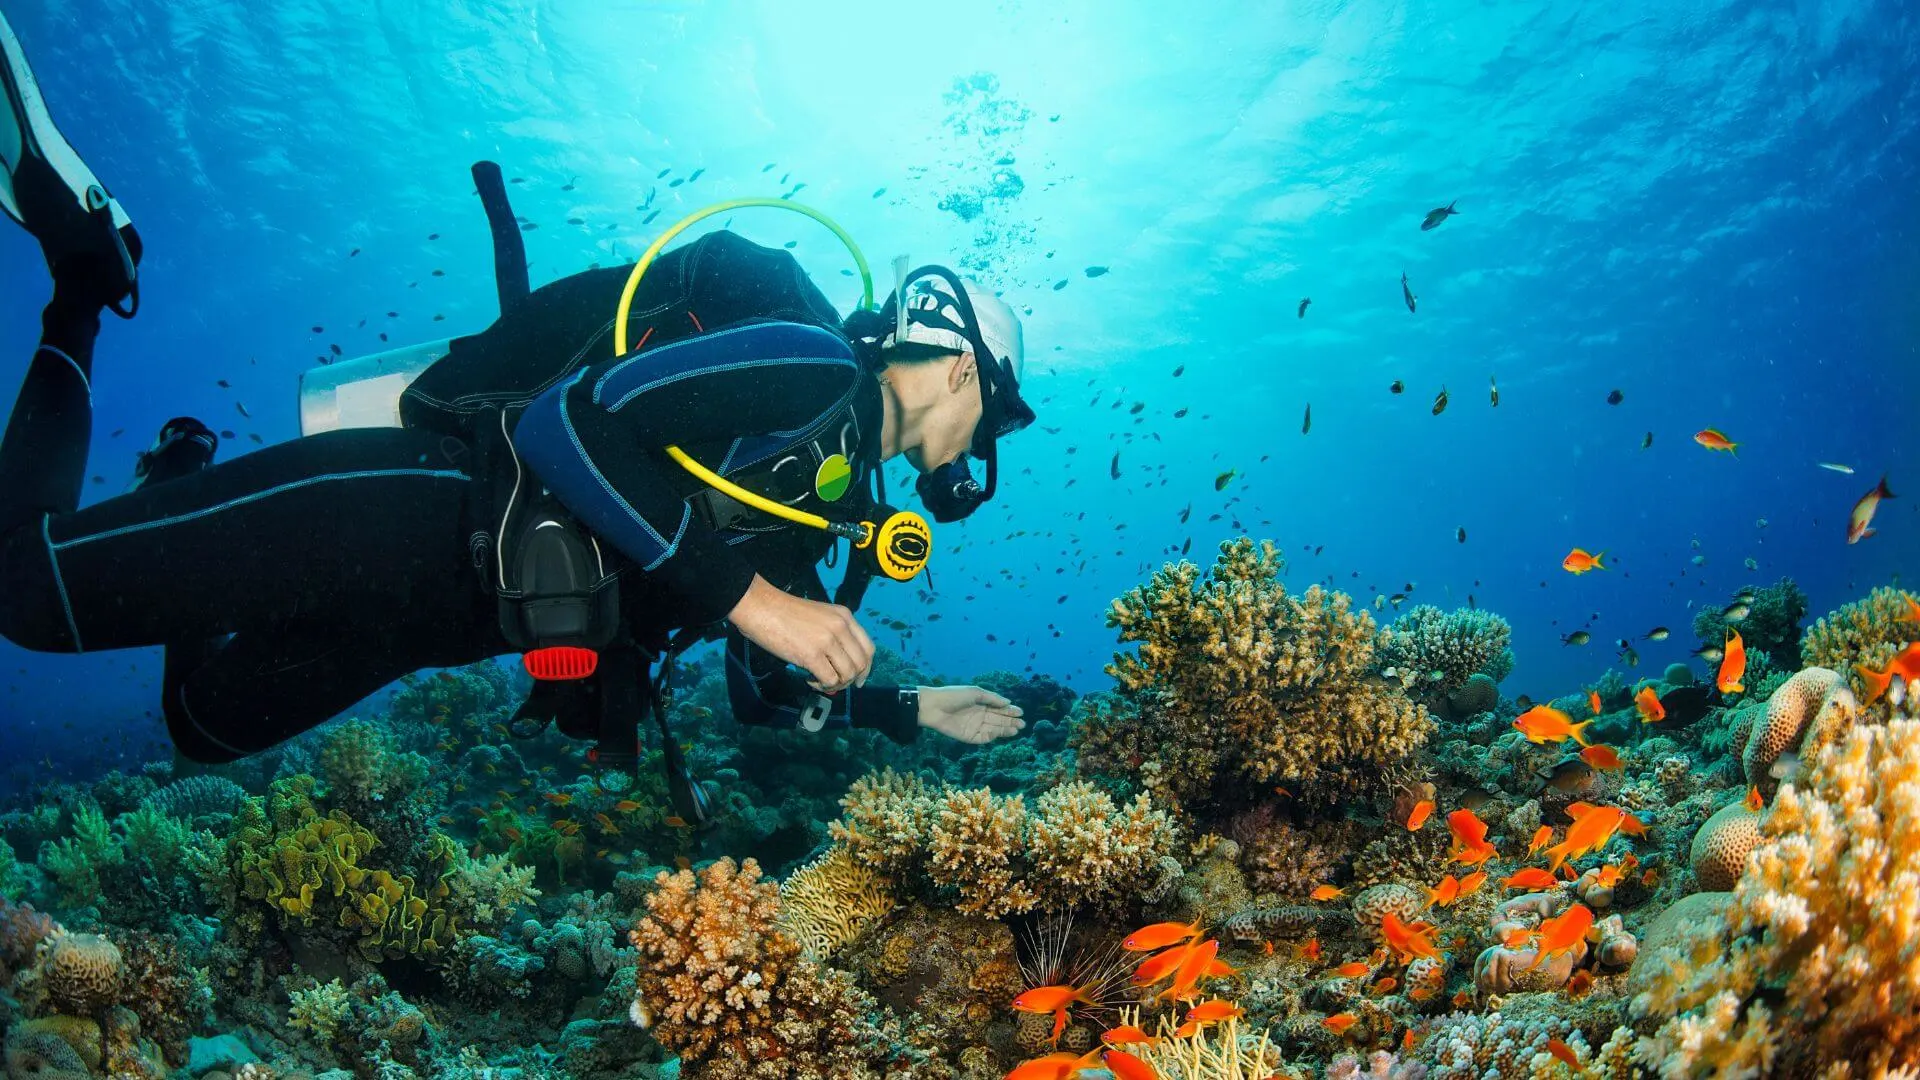 An Introduction to the Thrills of Scuba Diving